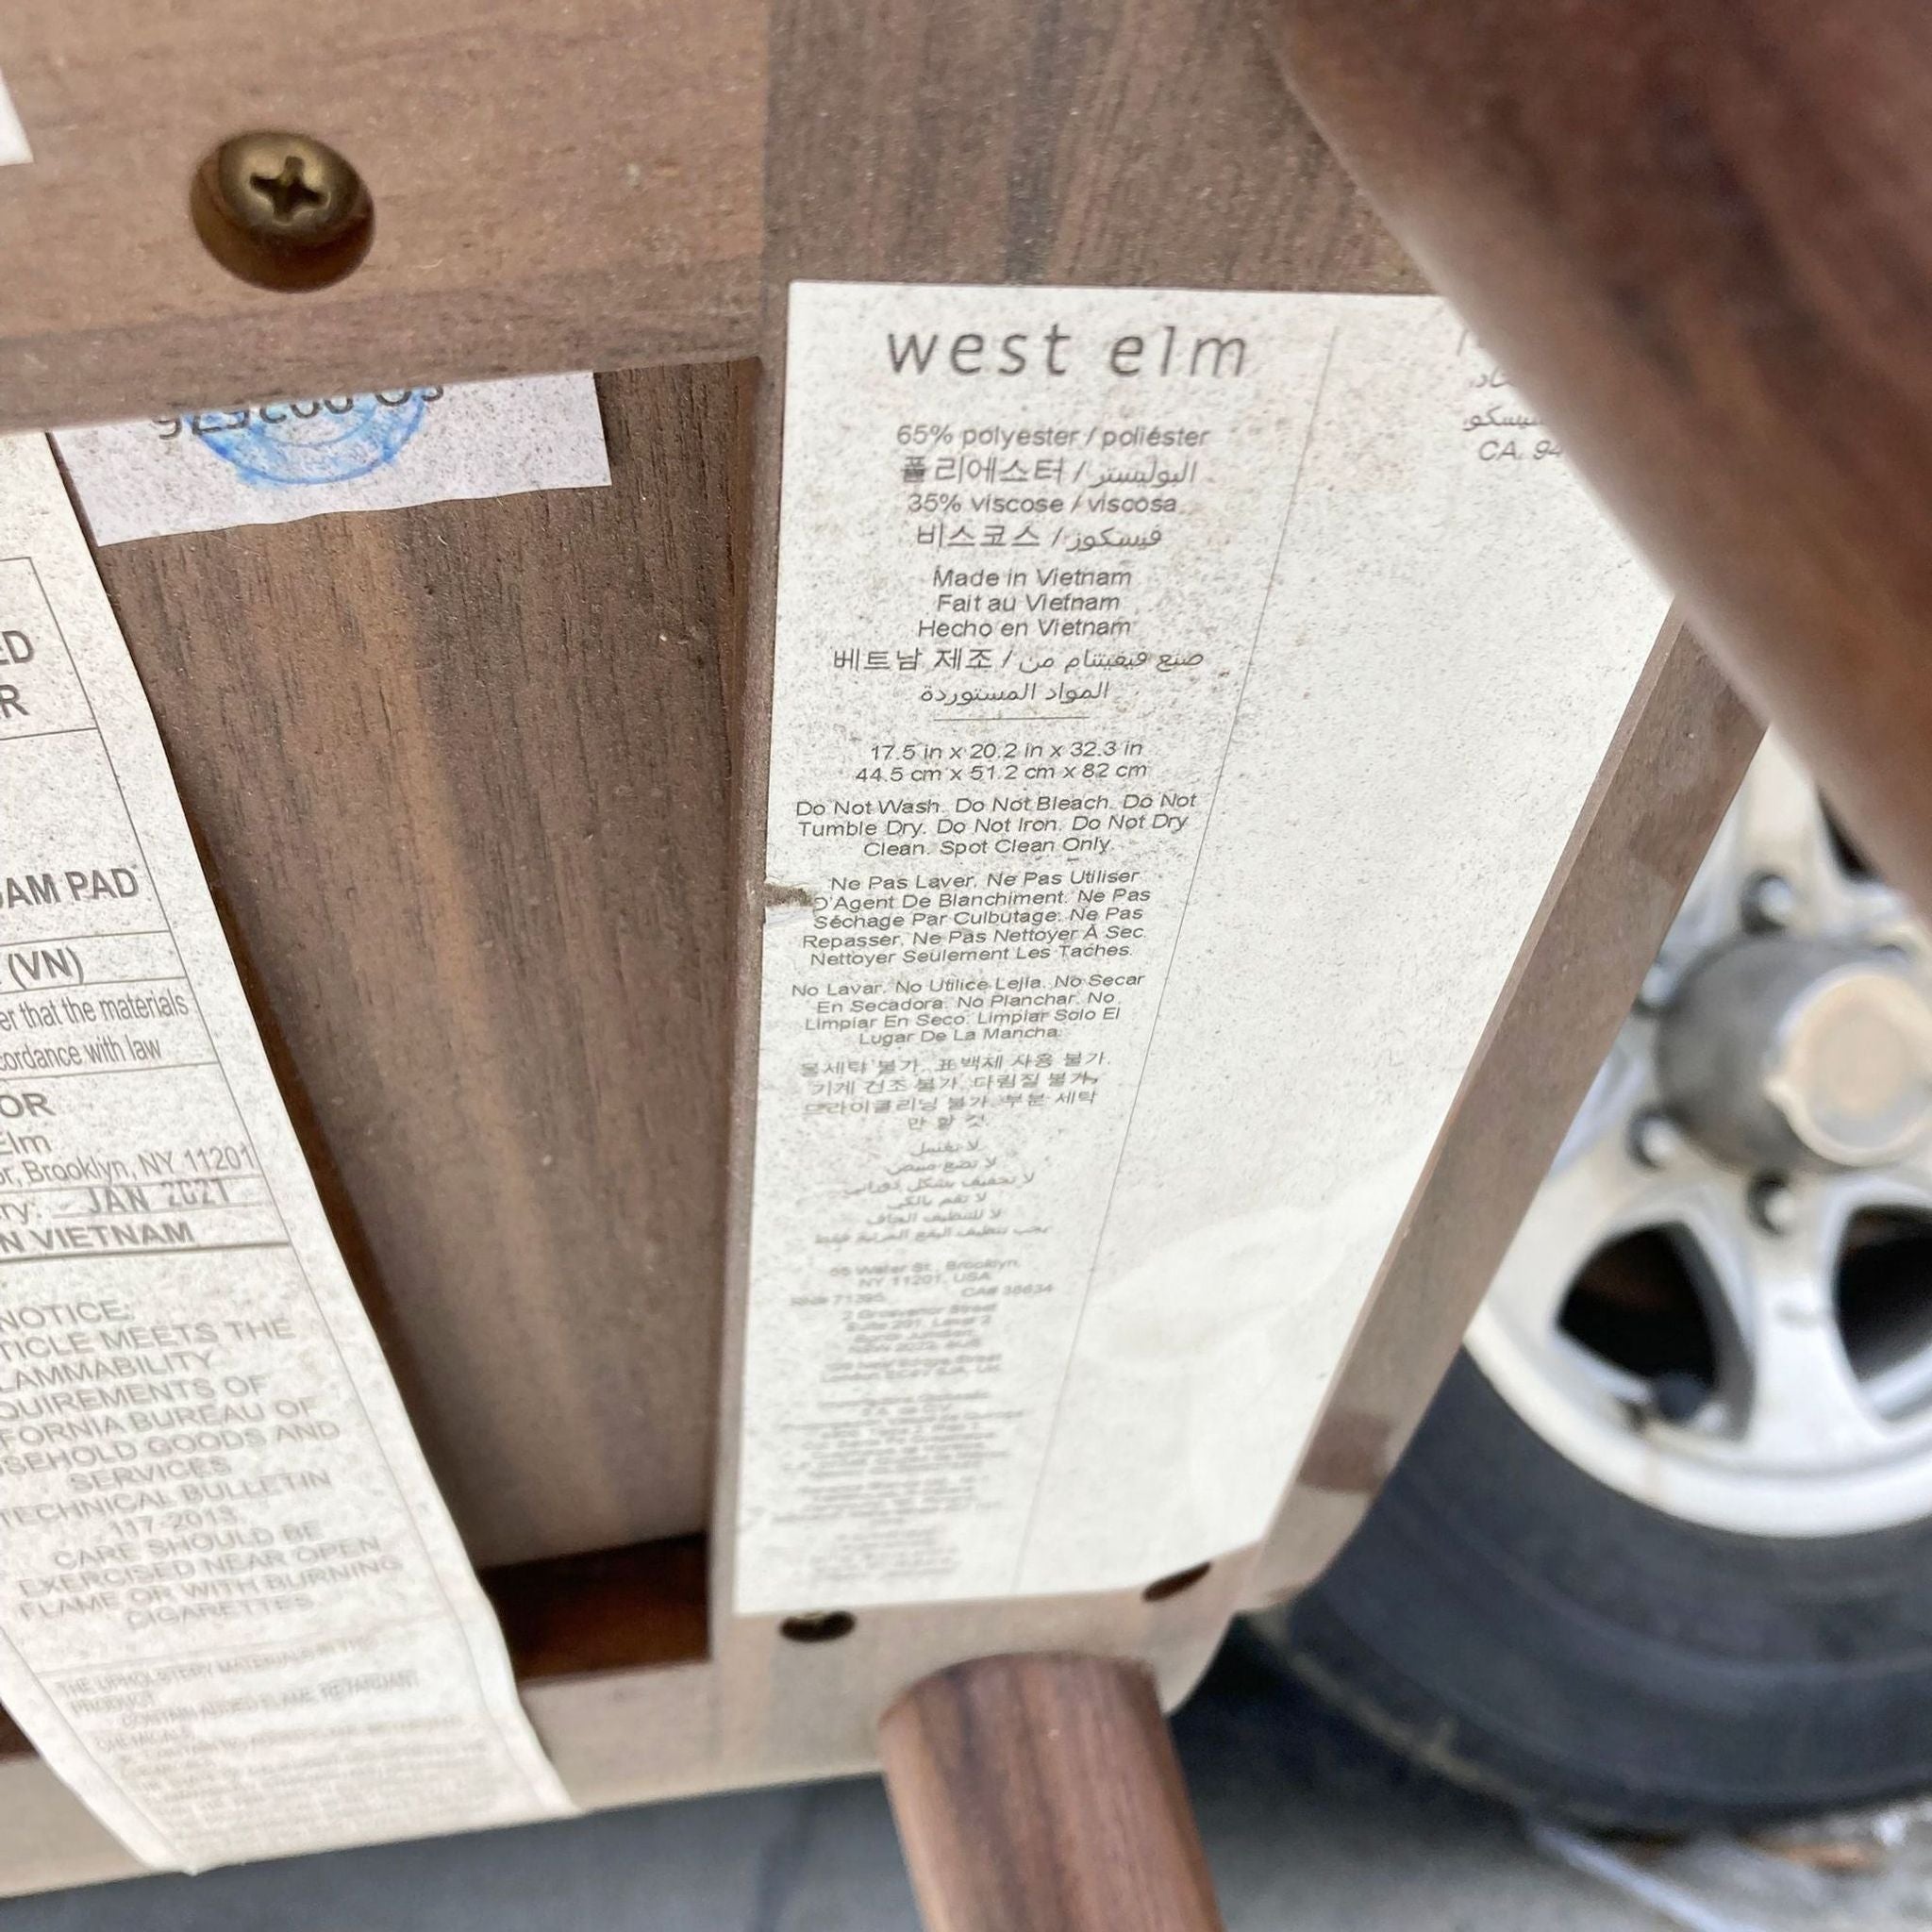 2. Close-up of a West Elm label on the underside of a wooden chair, detailing materials and care instructions.